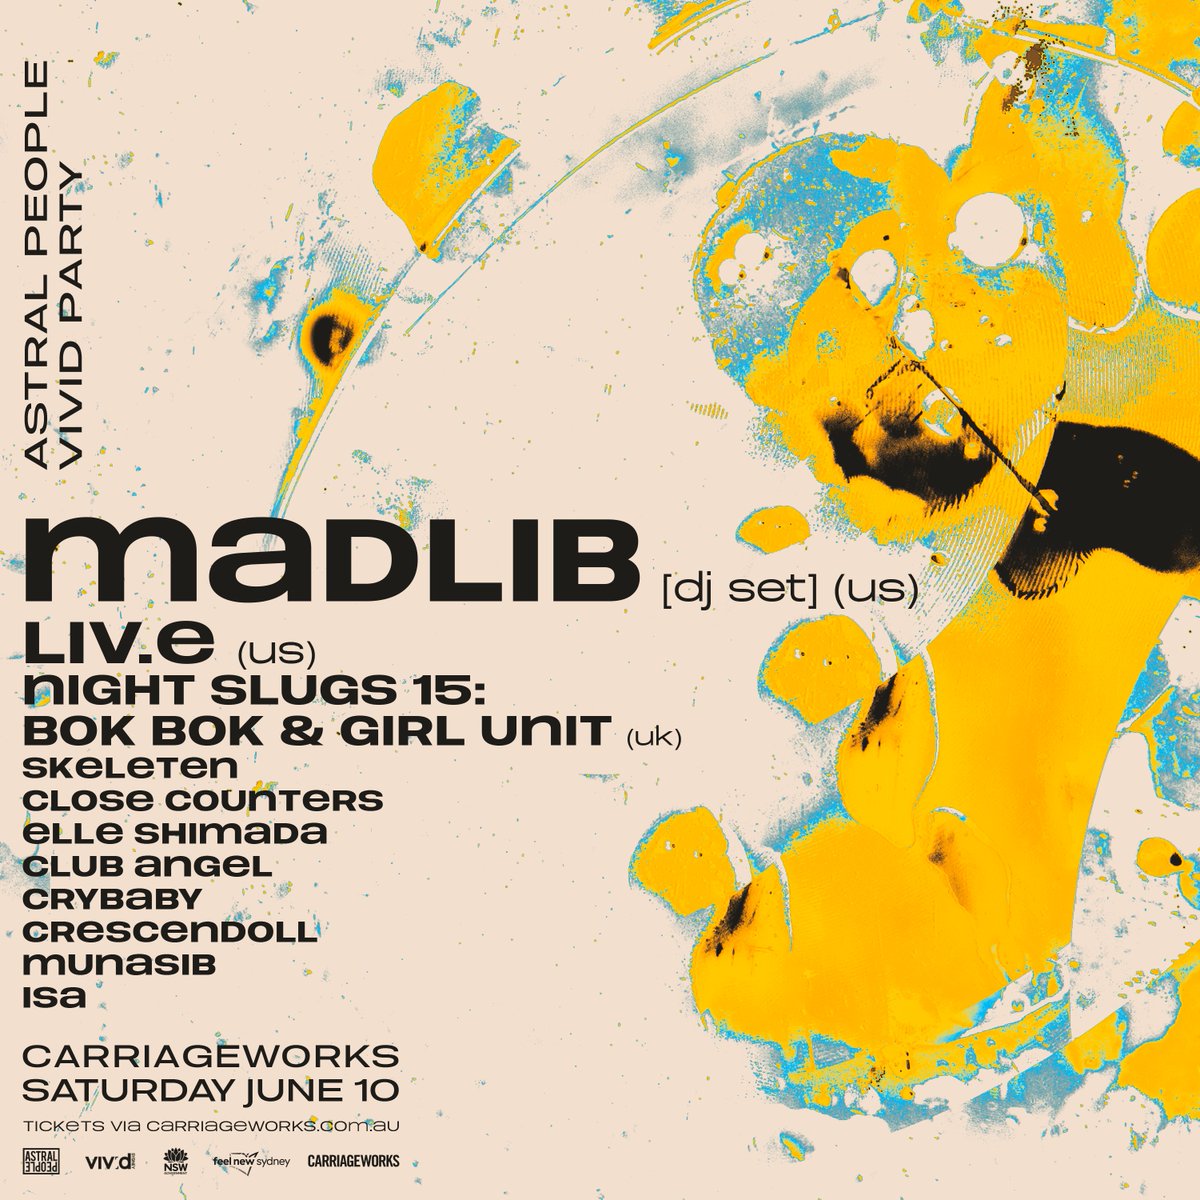 ⚜️ MADLIB RETURNS ⚜️ It is with regret that due to scheduling issues beyond our control, Flylo won’t be able to perform at our Vivid party next month. but we've locked in the beat konducta madlib All existing ticket holders have been communicated with by Carriageworks 🤝